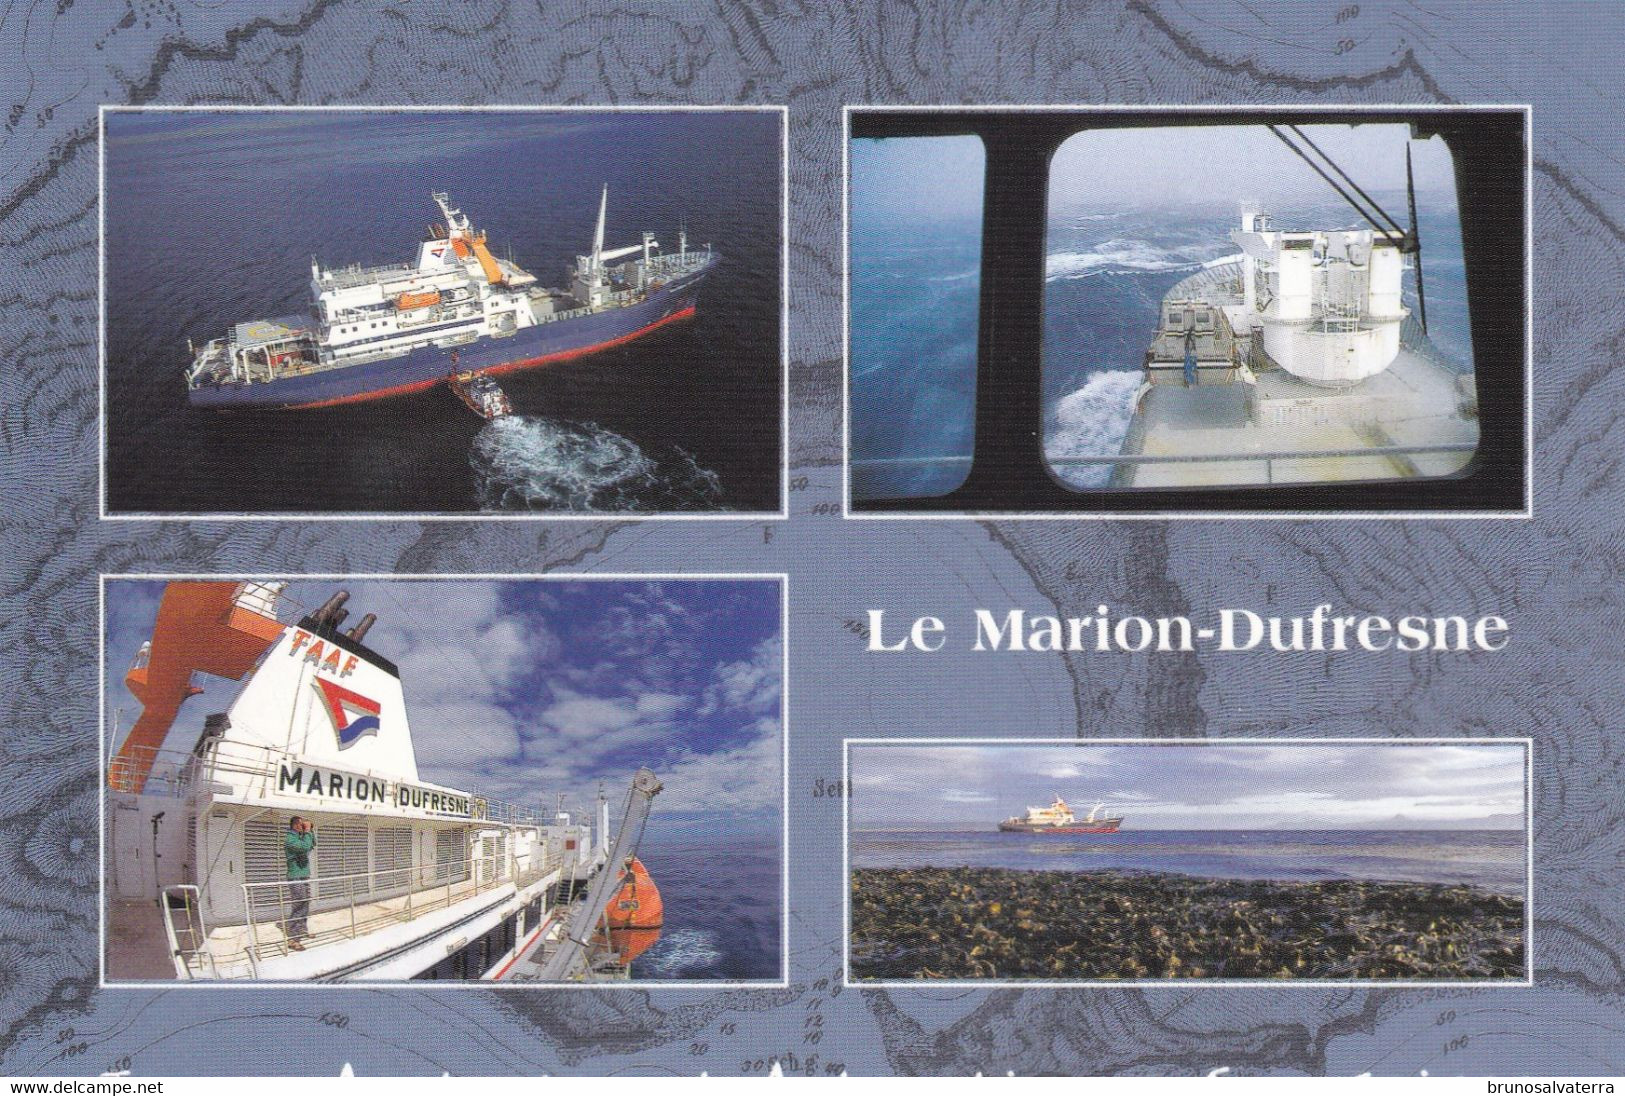 TERRES AUSTRALES ET ANTARCTIQUES FRANCAISES - Le Marion-Dufresne - TAAF : French Southern And Antarctic Lands